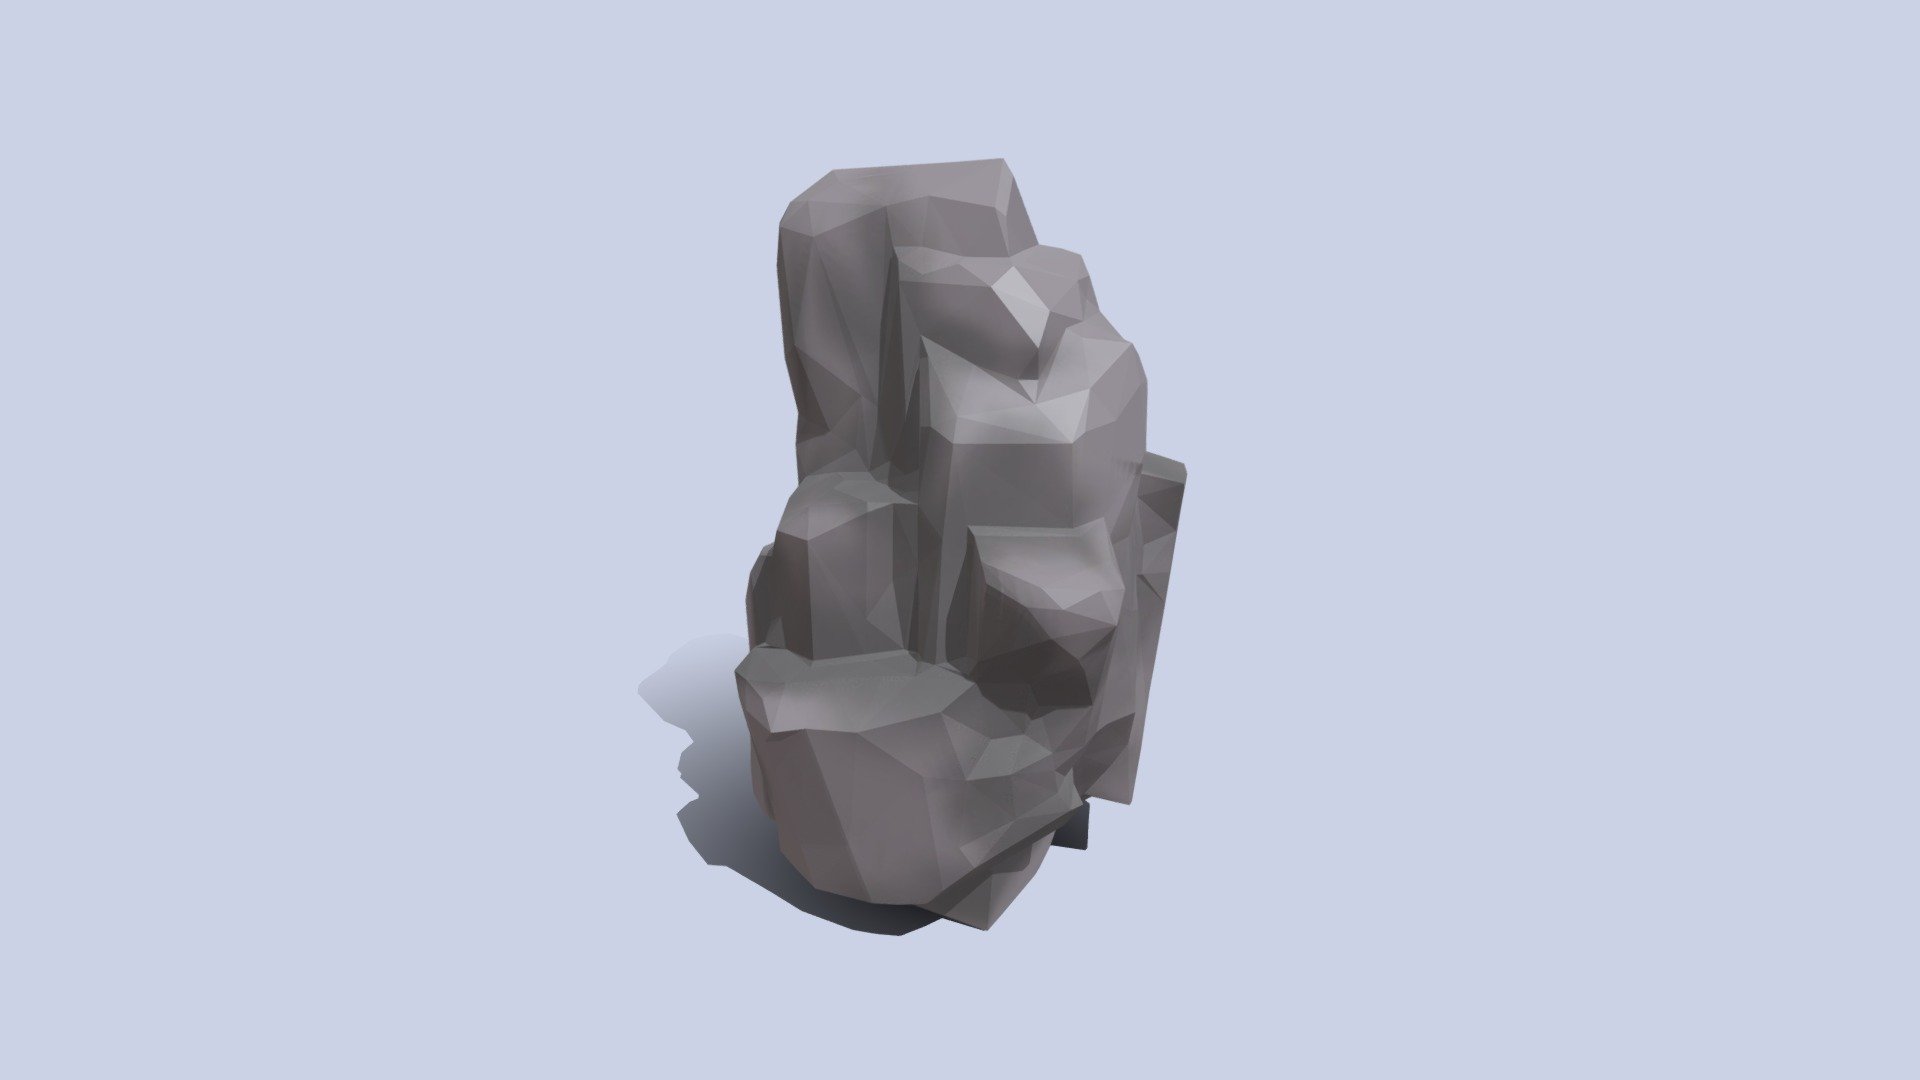 Detailed Low Poly Rock
Cool low poly rock for an enviromnet  

Detailed Low Poly Rock Specifications
-Asset is UV Mapped
-Asset is LowPoly - Detailed Low Poly Rock - Download Free 3D model by OblixStudio 3d model